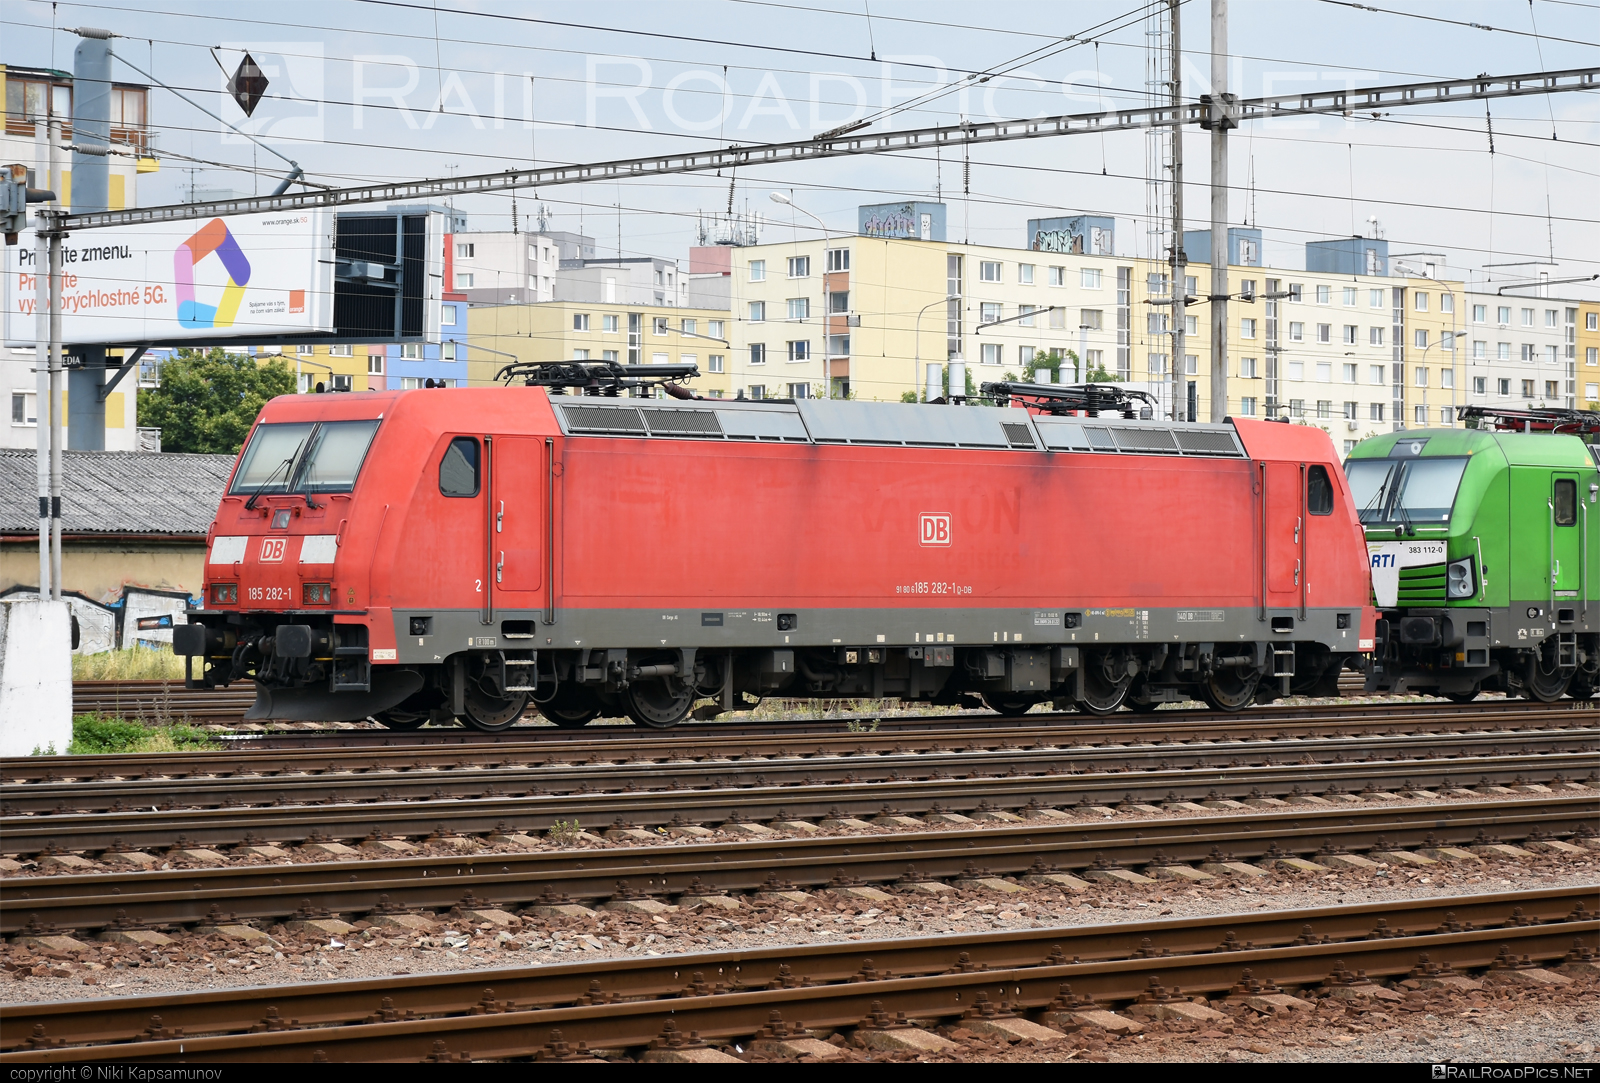 Bombardier TRAXX F140 AC2 - 185 282-1 operated by DB Cargo AG #bombardier #bombardiertraxx #db #dbcargo #dbcargoag #deutschebahn #traxx #traxxf140 #traxxf140ac #traxxf140ac2